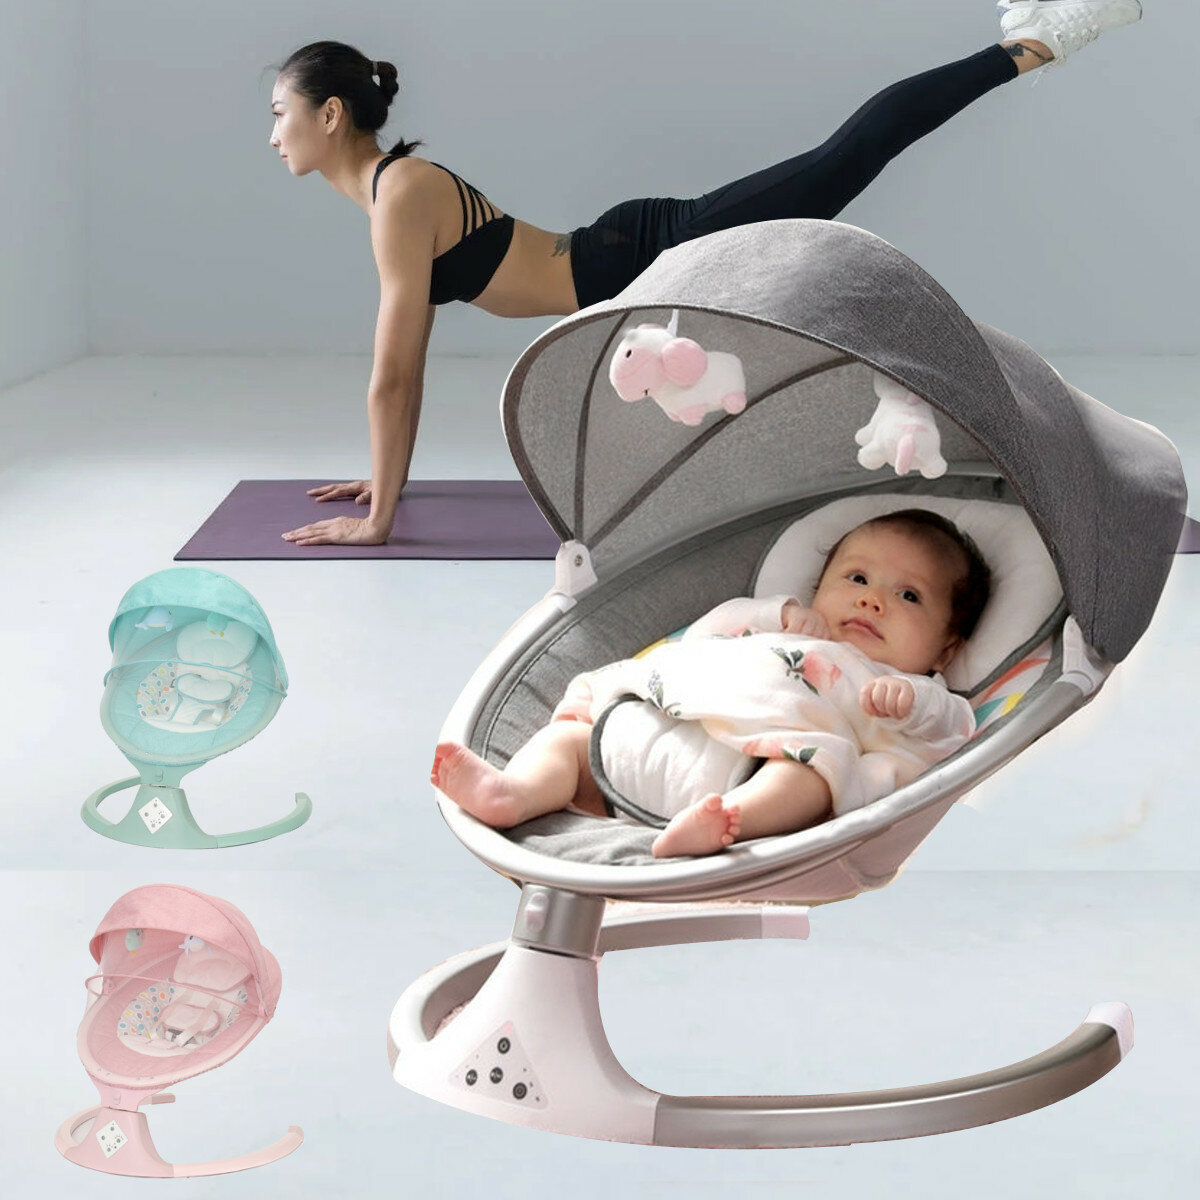 Image of Bioby Baby Swing Bouncer Chair Multi-function Music Electric Swing Activities Rocker Shaker Recliner Comfort Autoswing